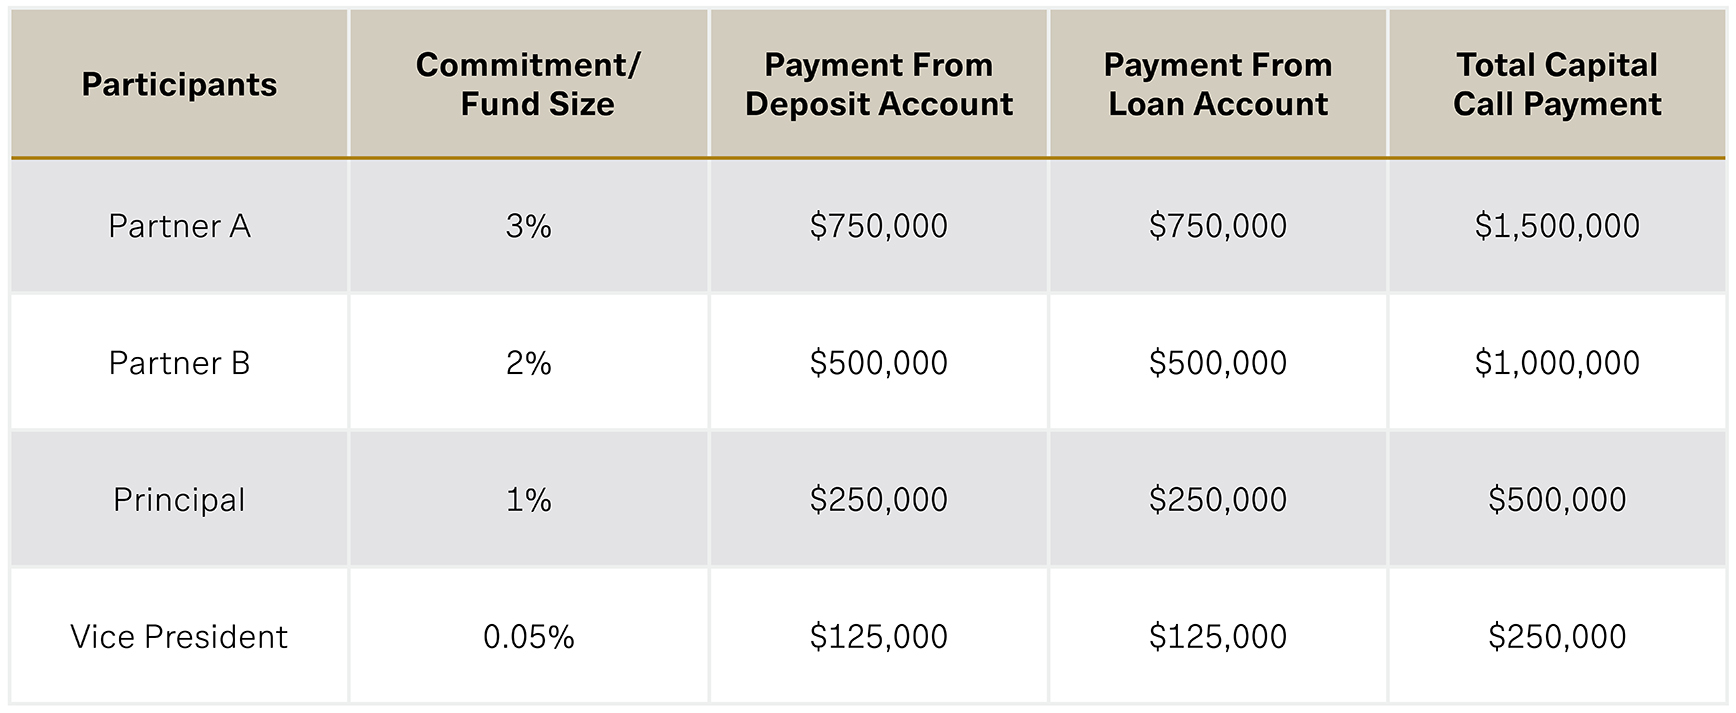 This table is an example scenario of how capital calls are executed in the PLP. In this scenario, a 10% capital call has been issued on a $500 million fund. Ten employees participate in the PLP, which stipulates a 50% advance rate for each participant on their respective fund commitment. Exhibit 1 shows the payments made from the deposit and loan accounts for this capital call for selected participants in this program. 